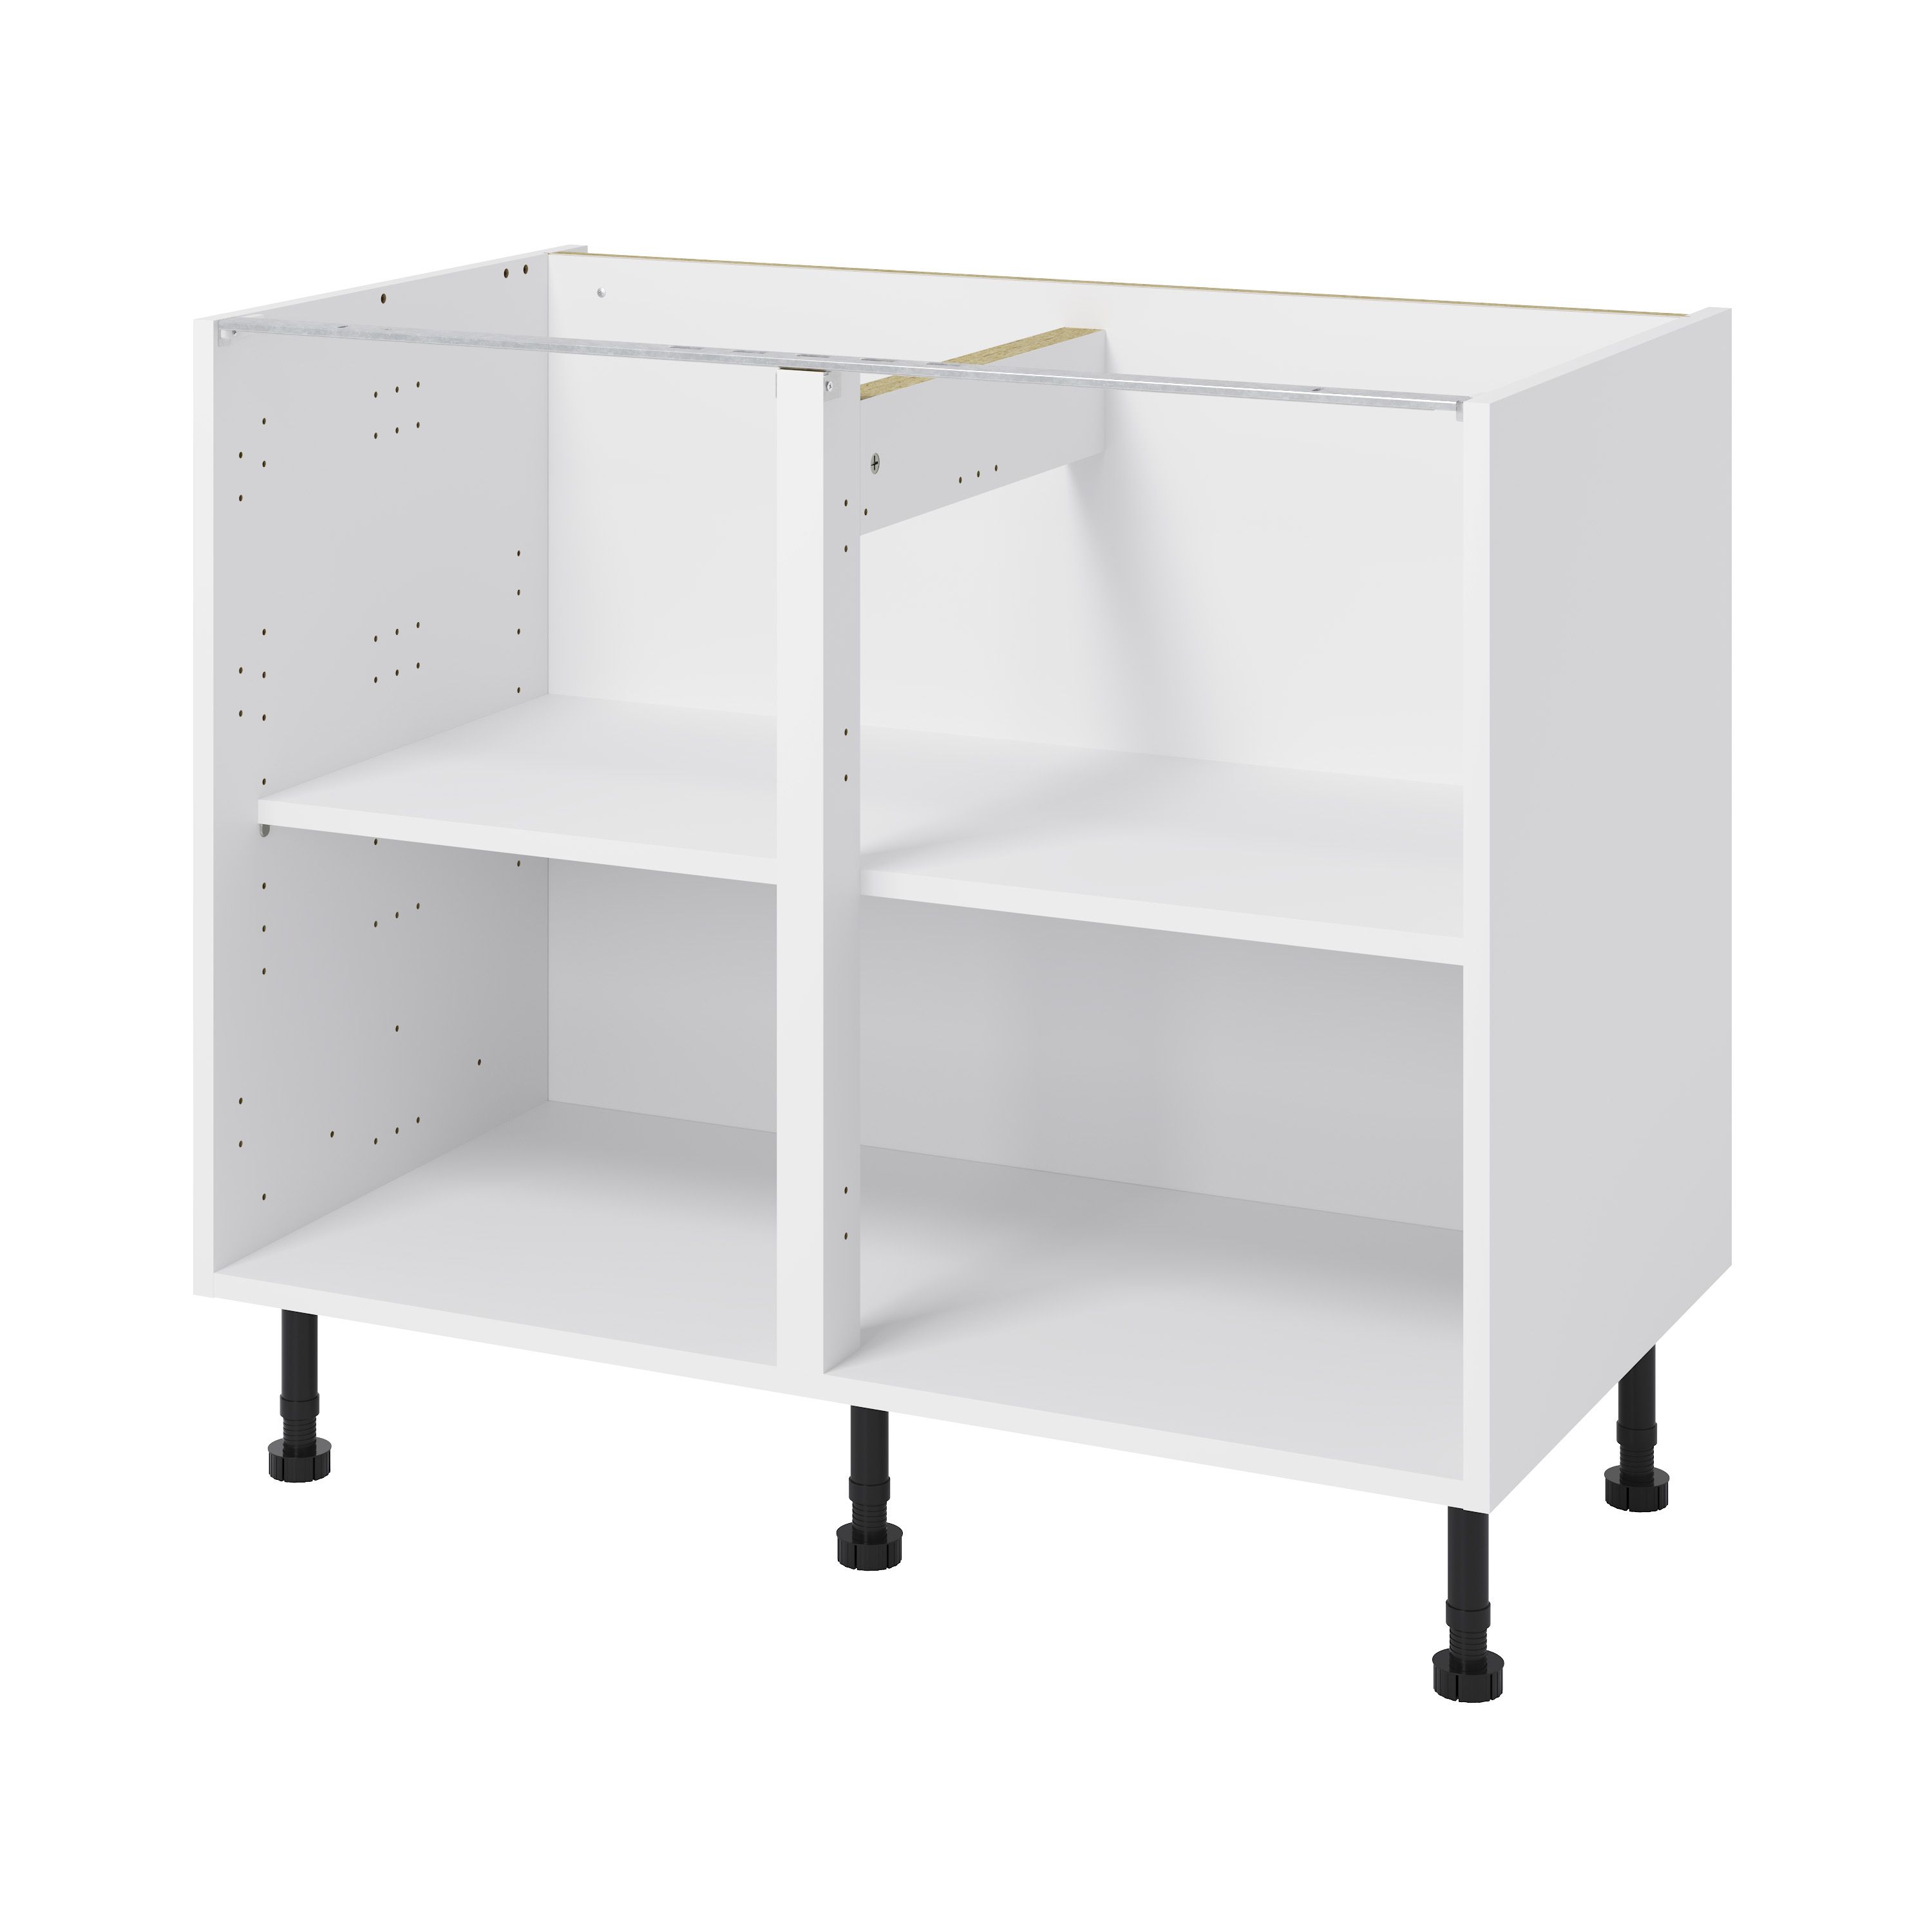 Goodhome Caraway White Base Cabinet W 1000mm Departments Diy